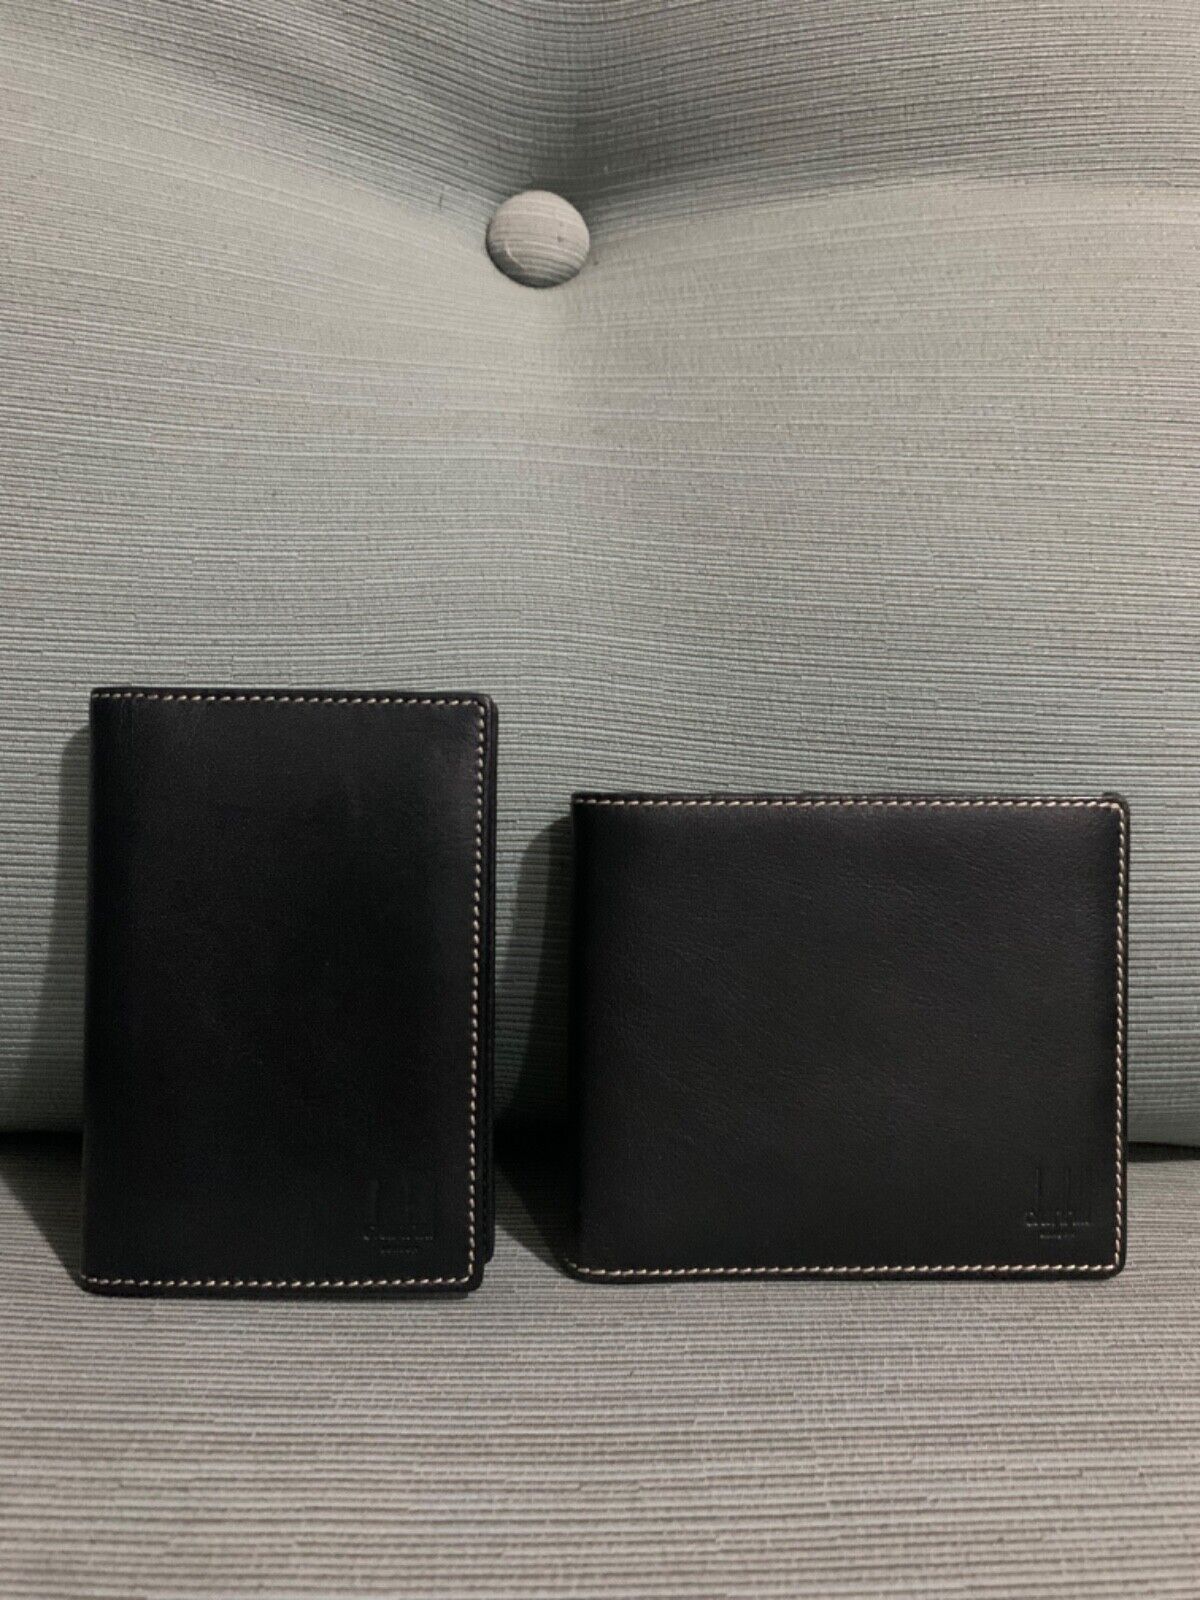 Authentic Dunhill Black Leather Men’s  Wallet And A Matching Card Holder 